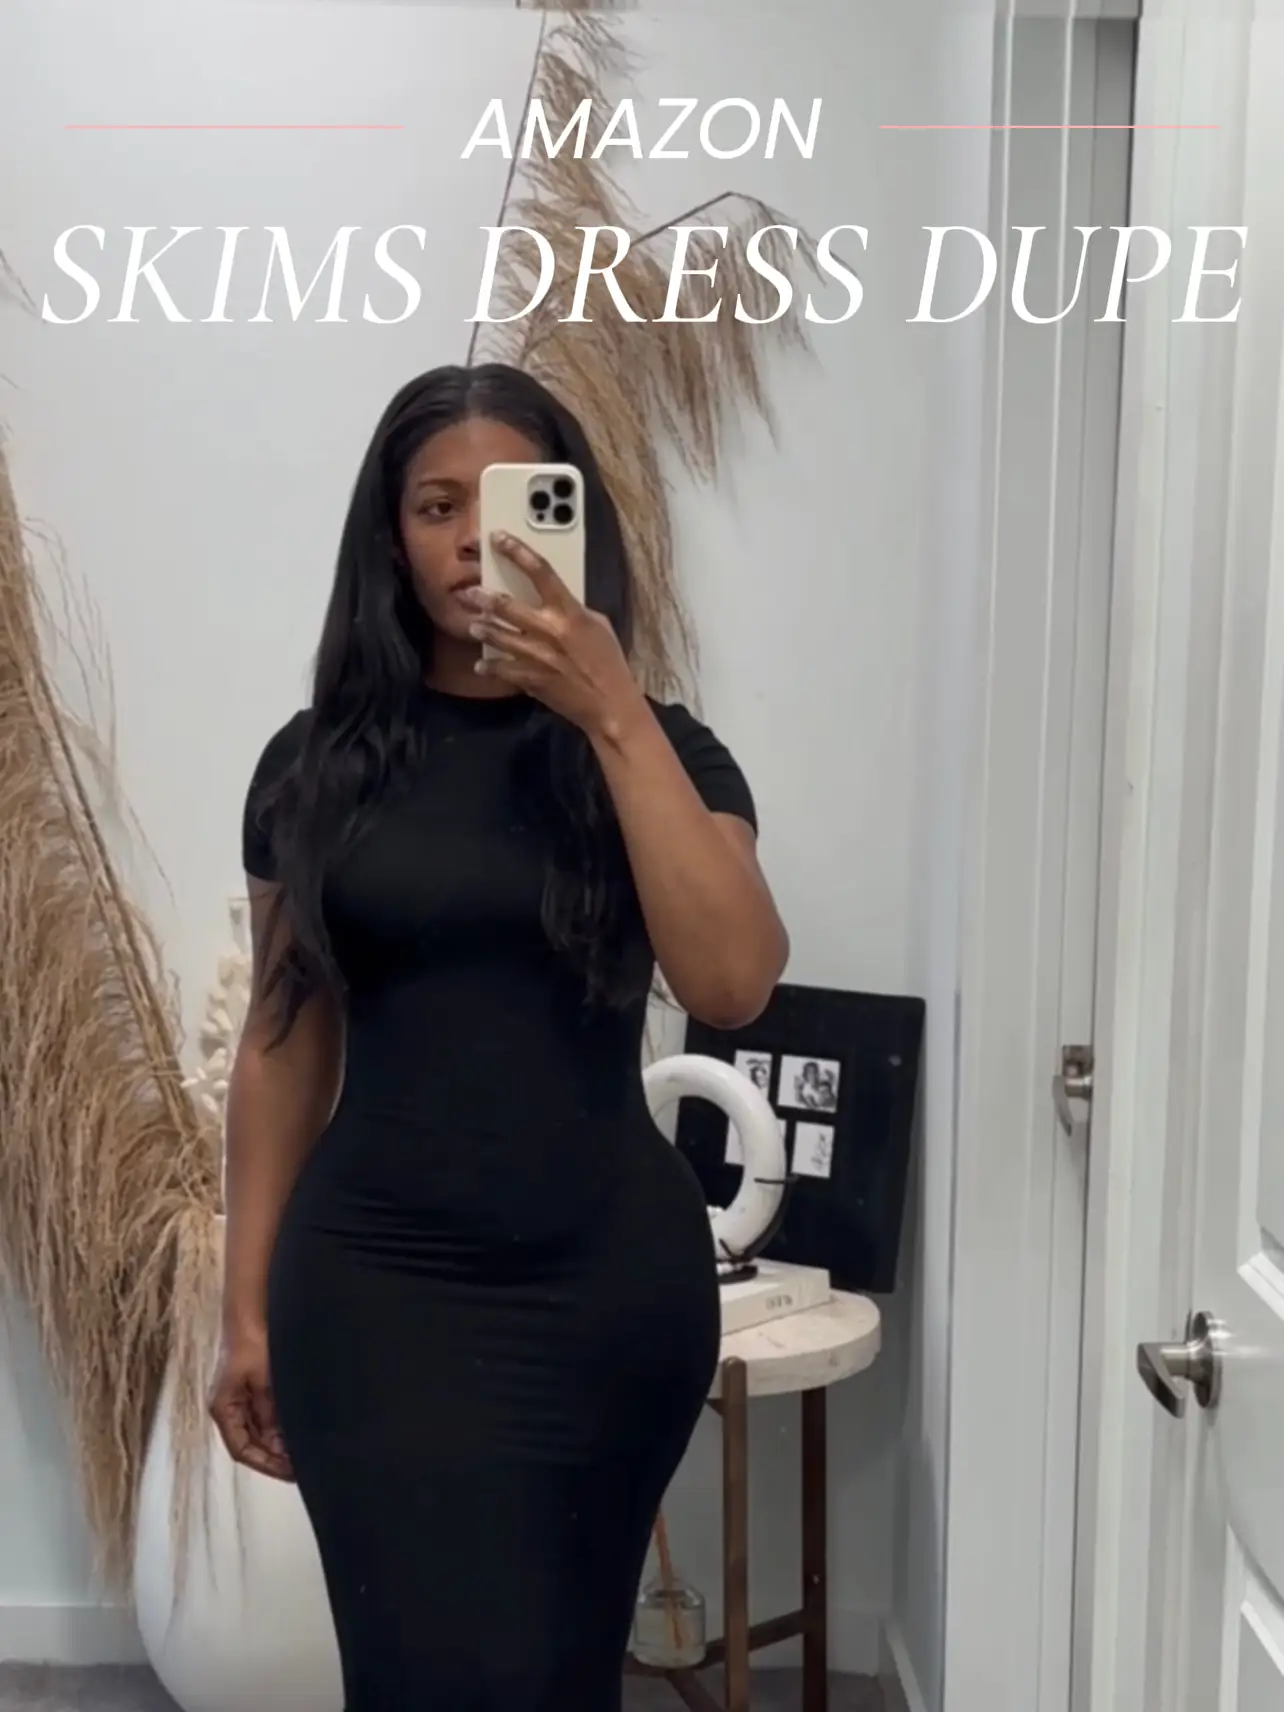 Skims Dress Review, Gallery posted by hrwise